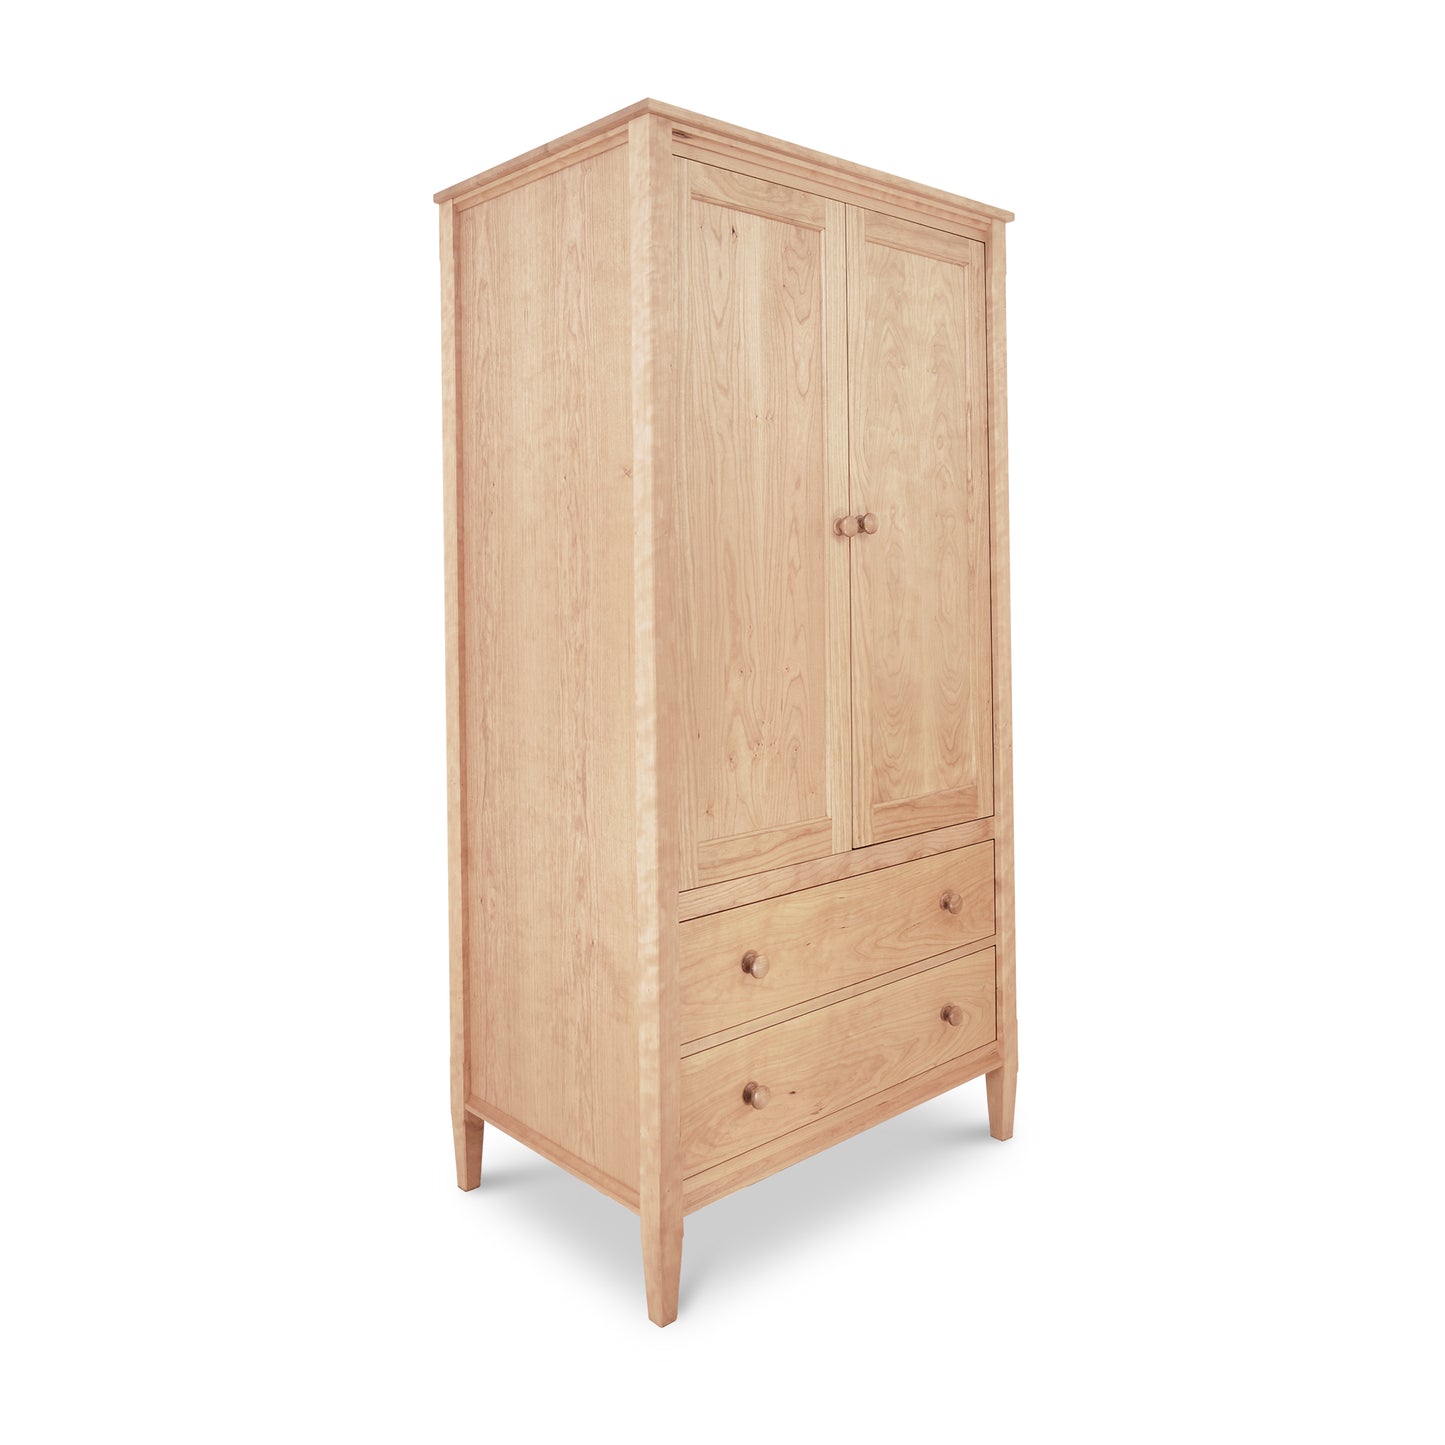 This heirloom Maple Corner Woodworks Vermont Shaker Armoire showcases solid wood construction, featuring two drawers and two doors.